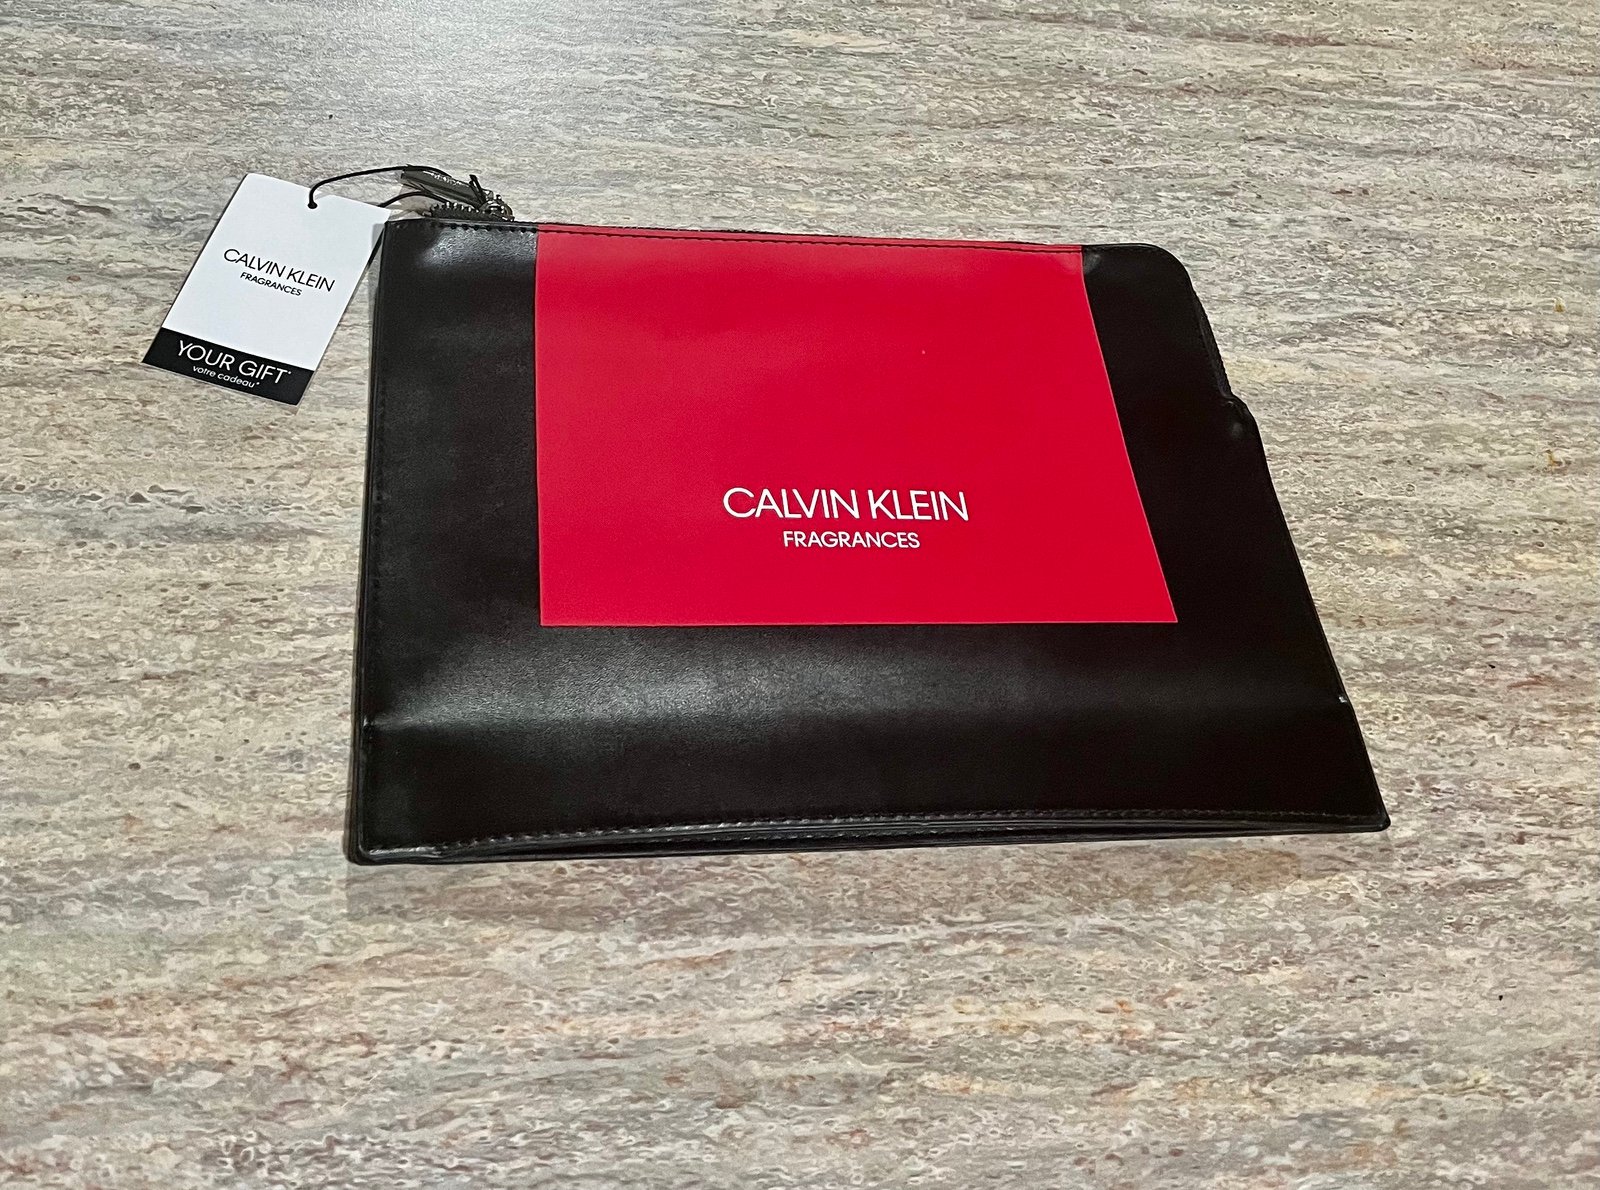 NWT Calvin Klein fragrance black and red clutch 44IP9GBd8